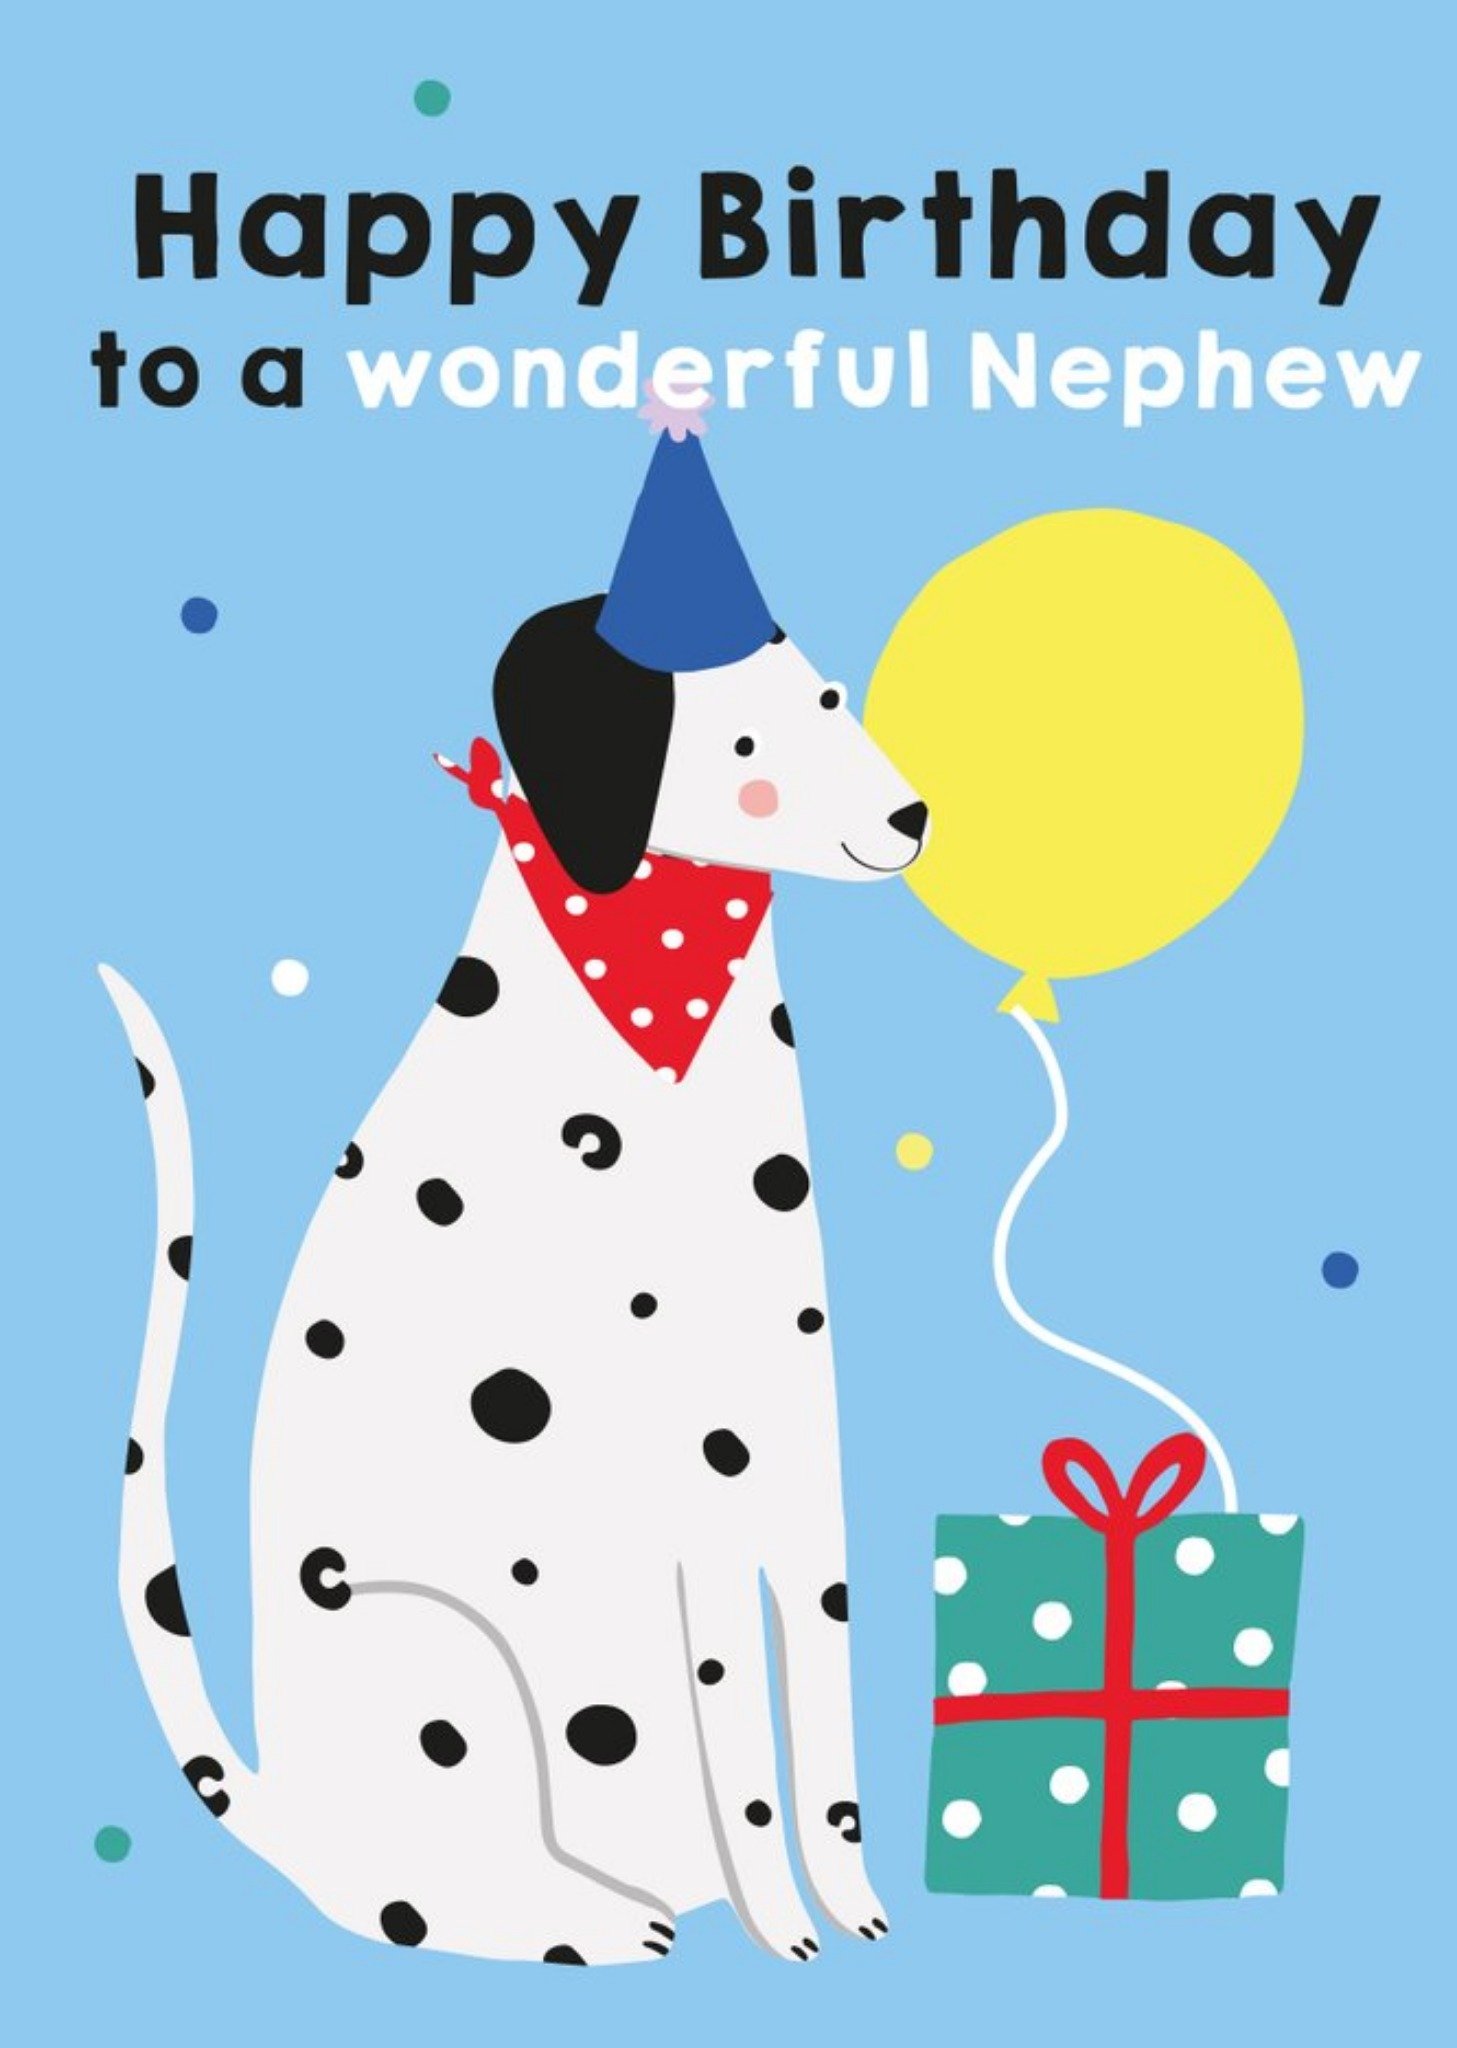 Moonpig Illustrated Cute Party Hat Dalmation Dog Happy Birthday To A Wonderful Nephew, Large Card